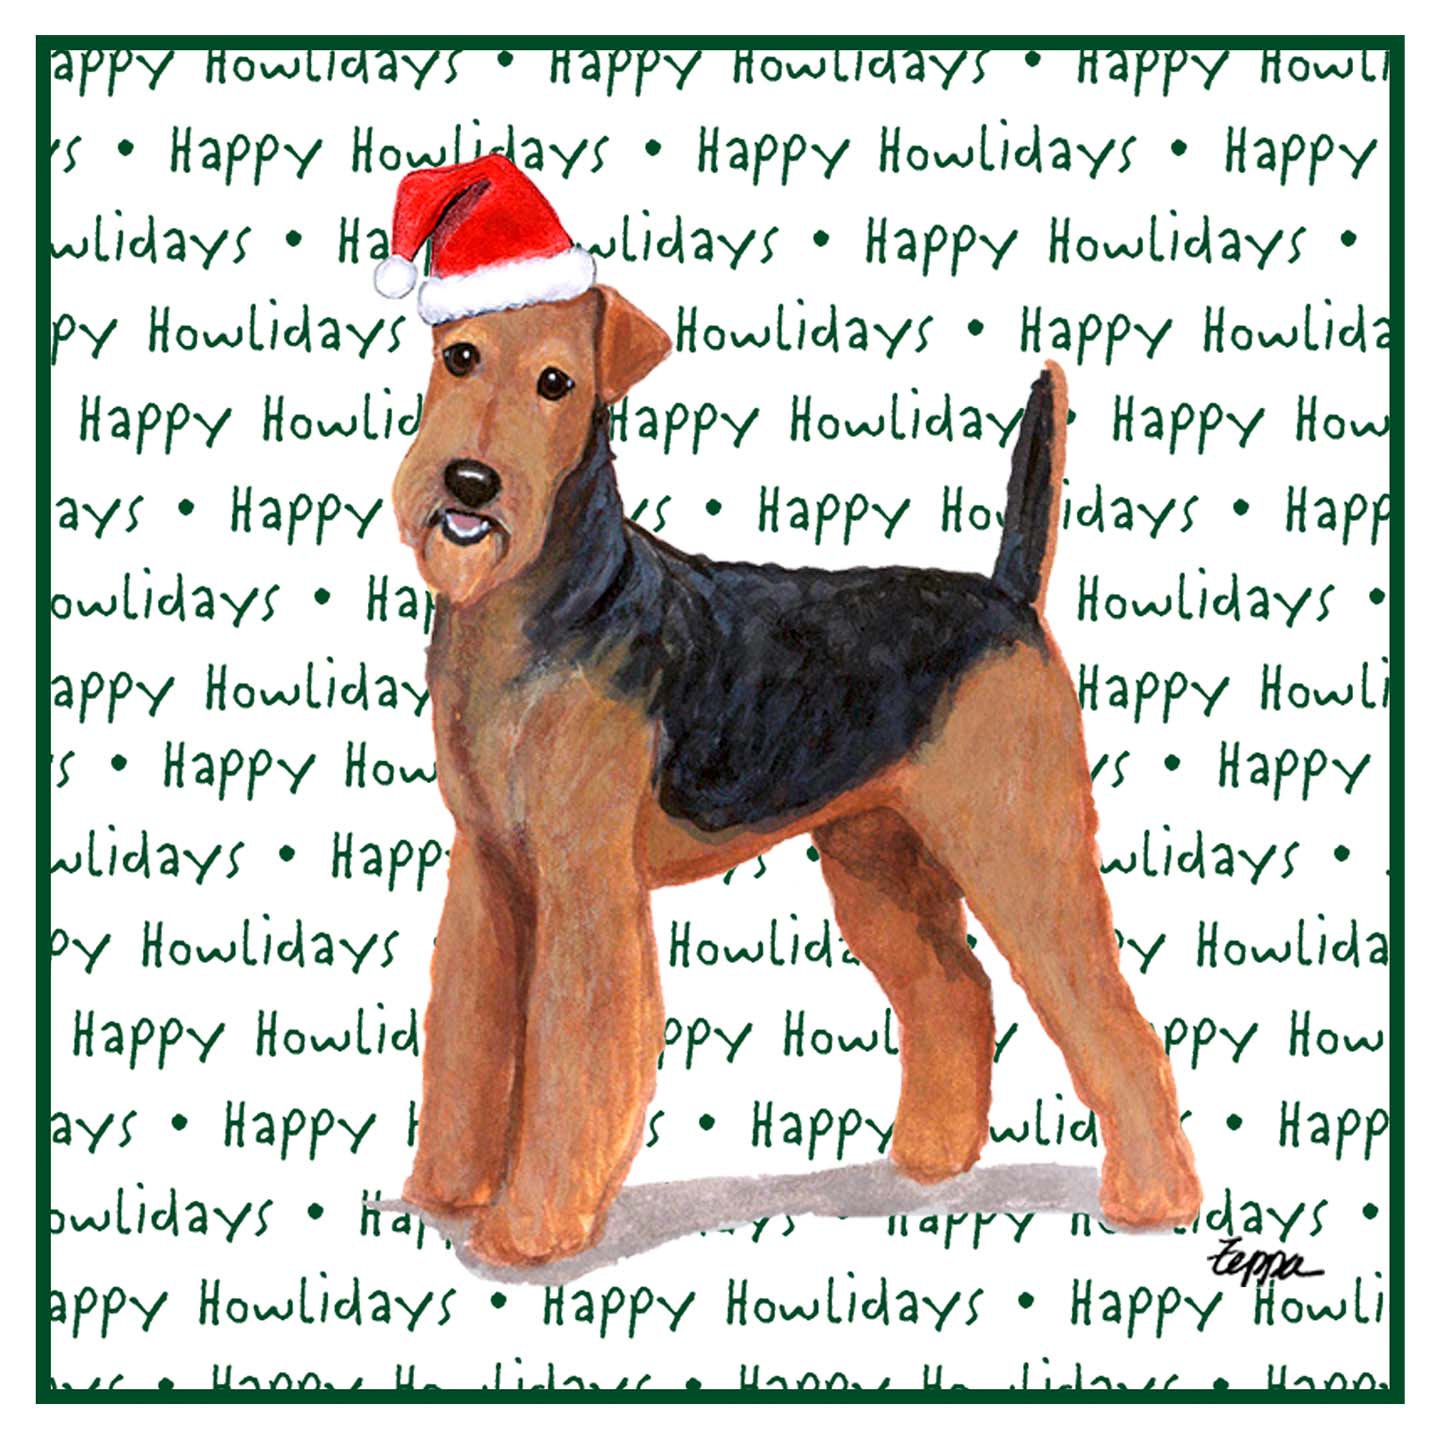 Airedale Terrier Happy Howlidays Text - Women's V-Neck T-Shirt